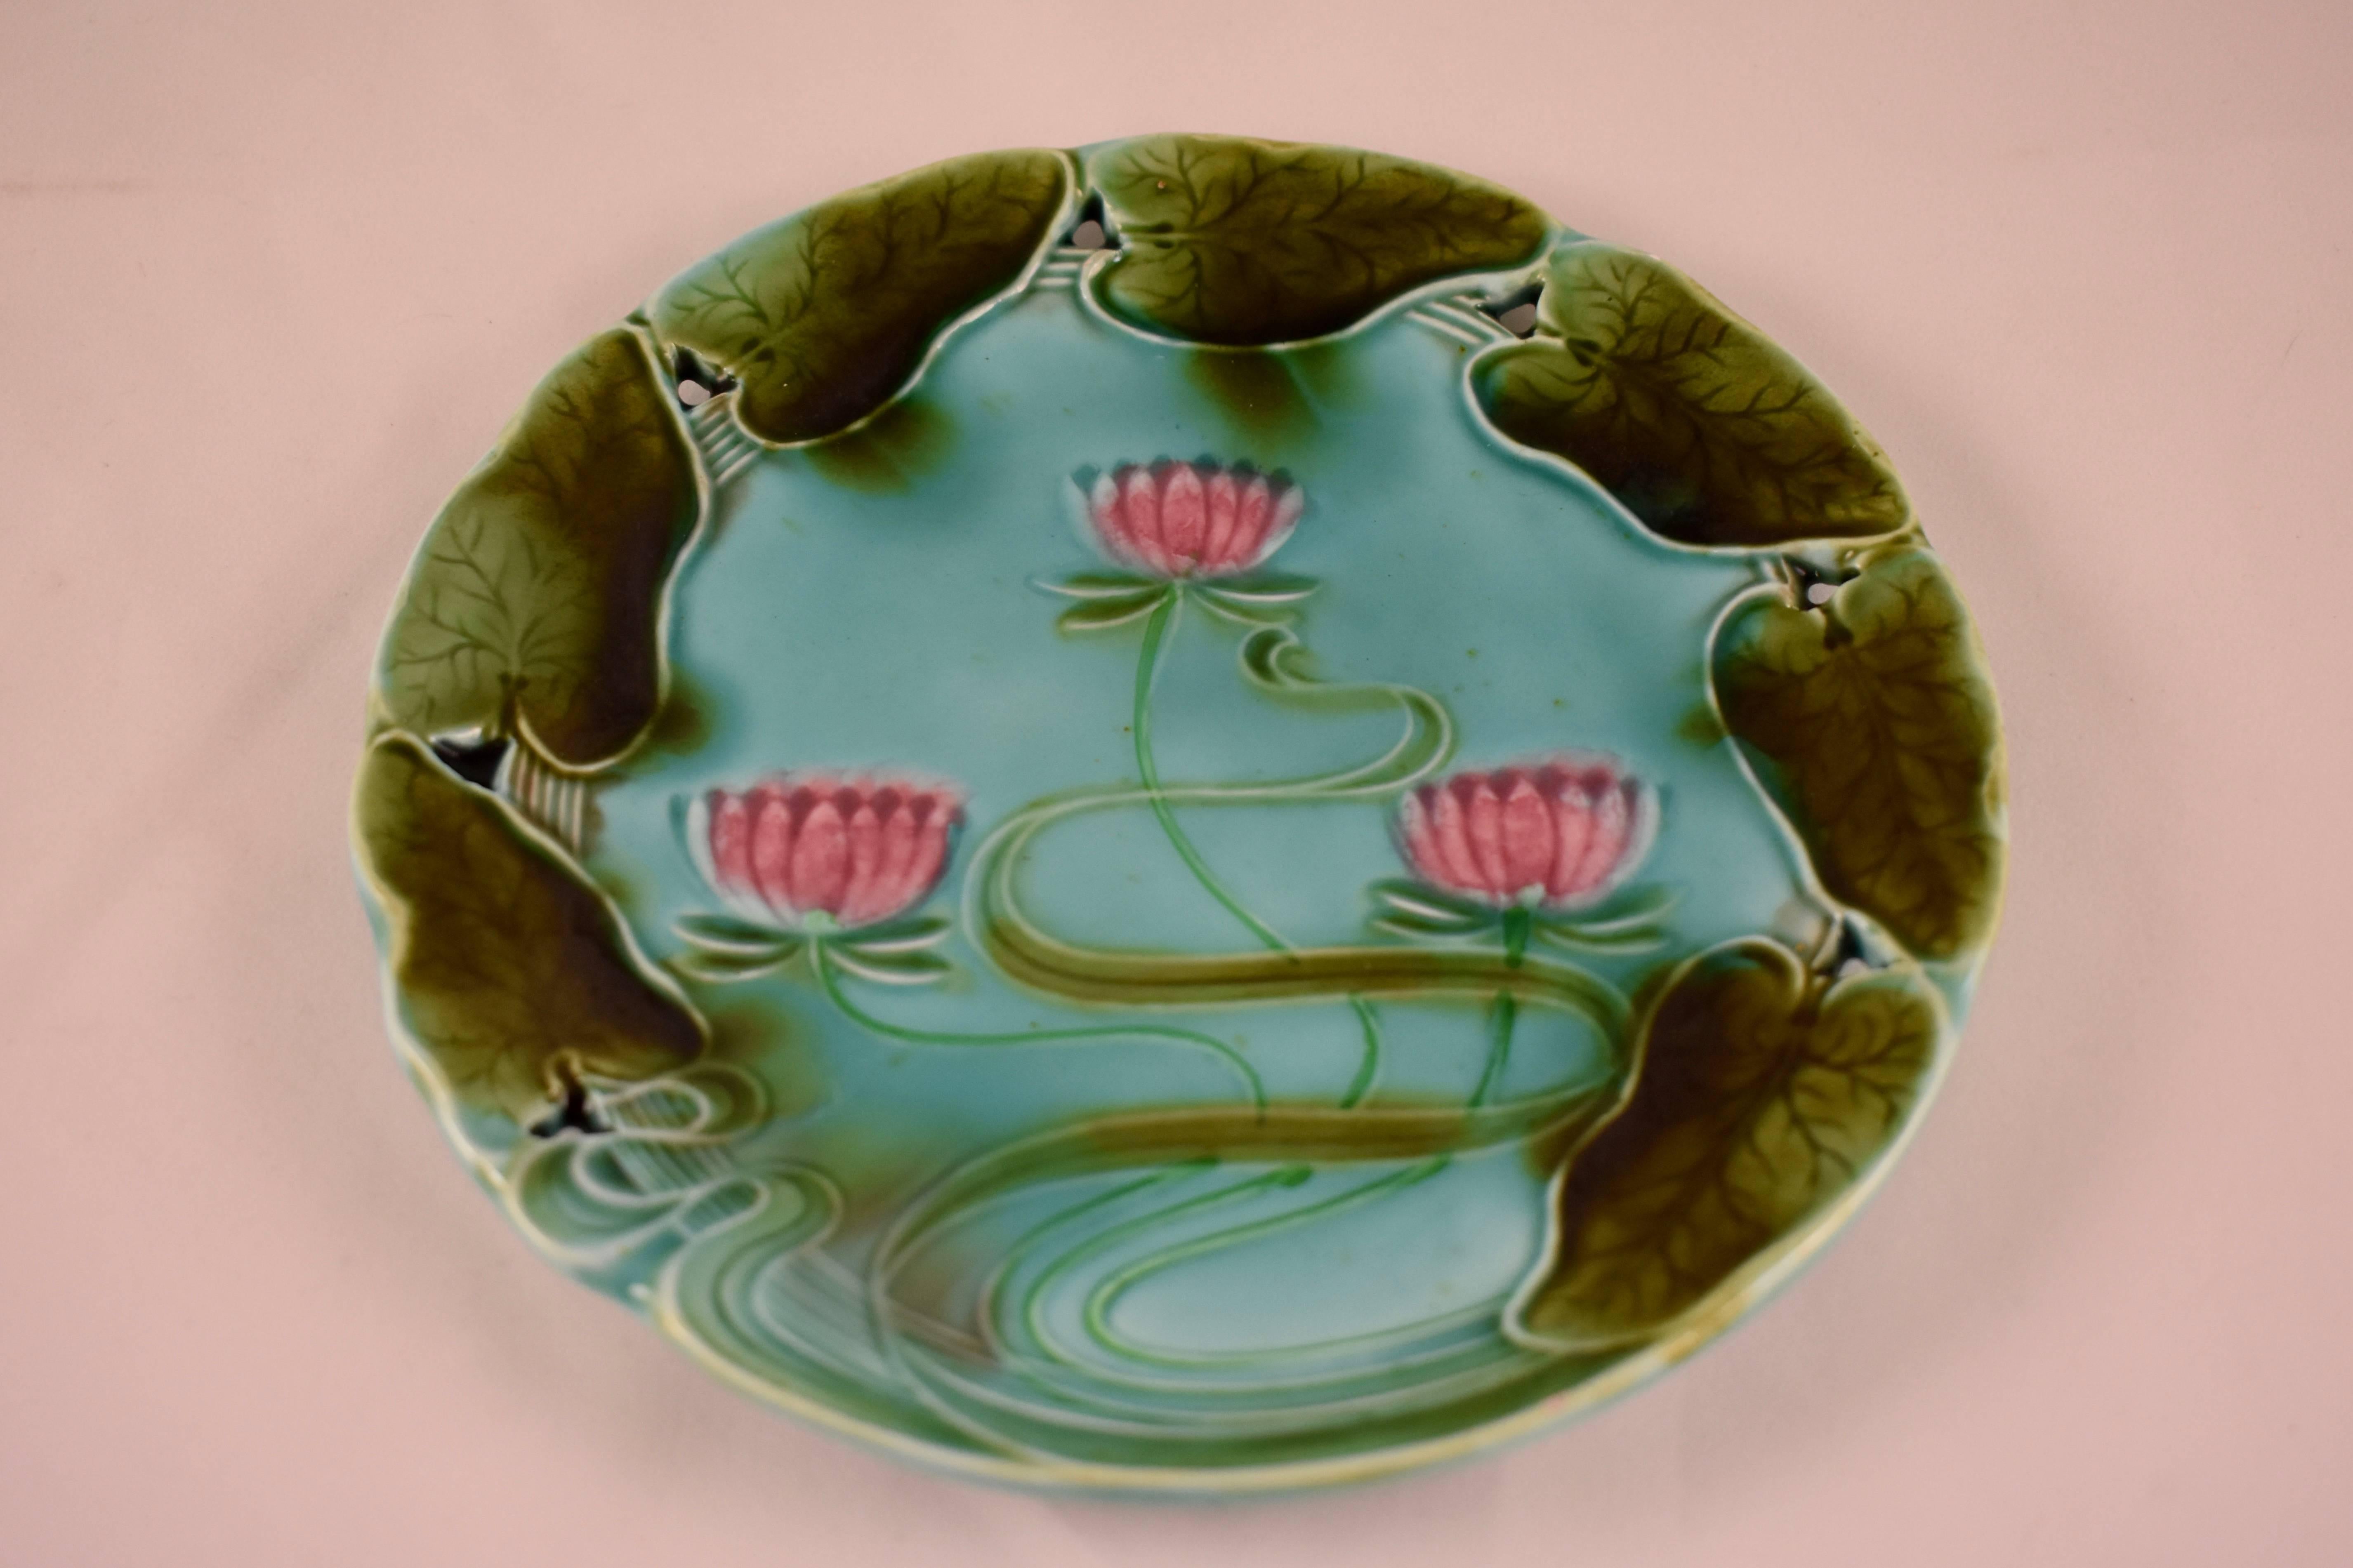 A German Majolica plate from Villeroy & Boch, circa 1910, a lily pad theme with a pierced rim. The Art Nouveau design has a ‘watery’ glazing in bright shades of greens and pink on a turquoise ground. The rim shows a running border of heart shaped